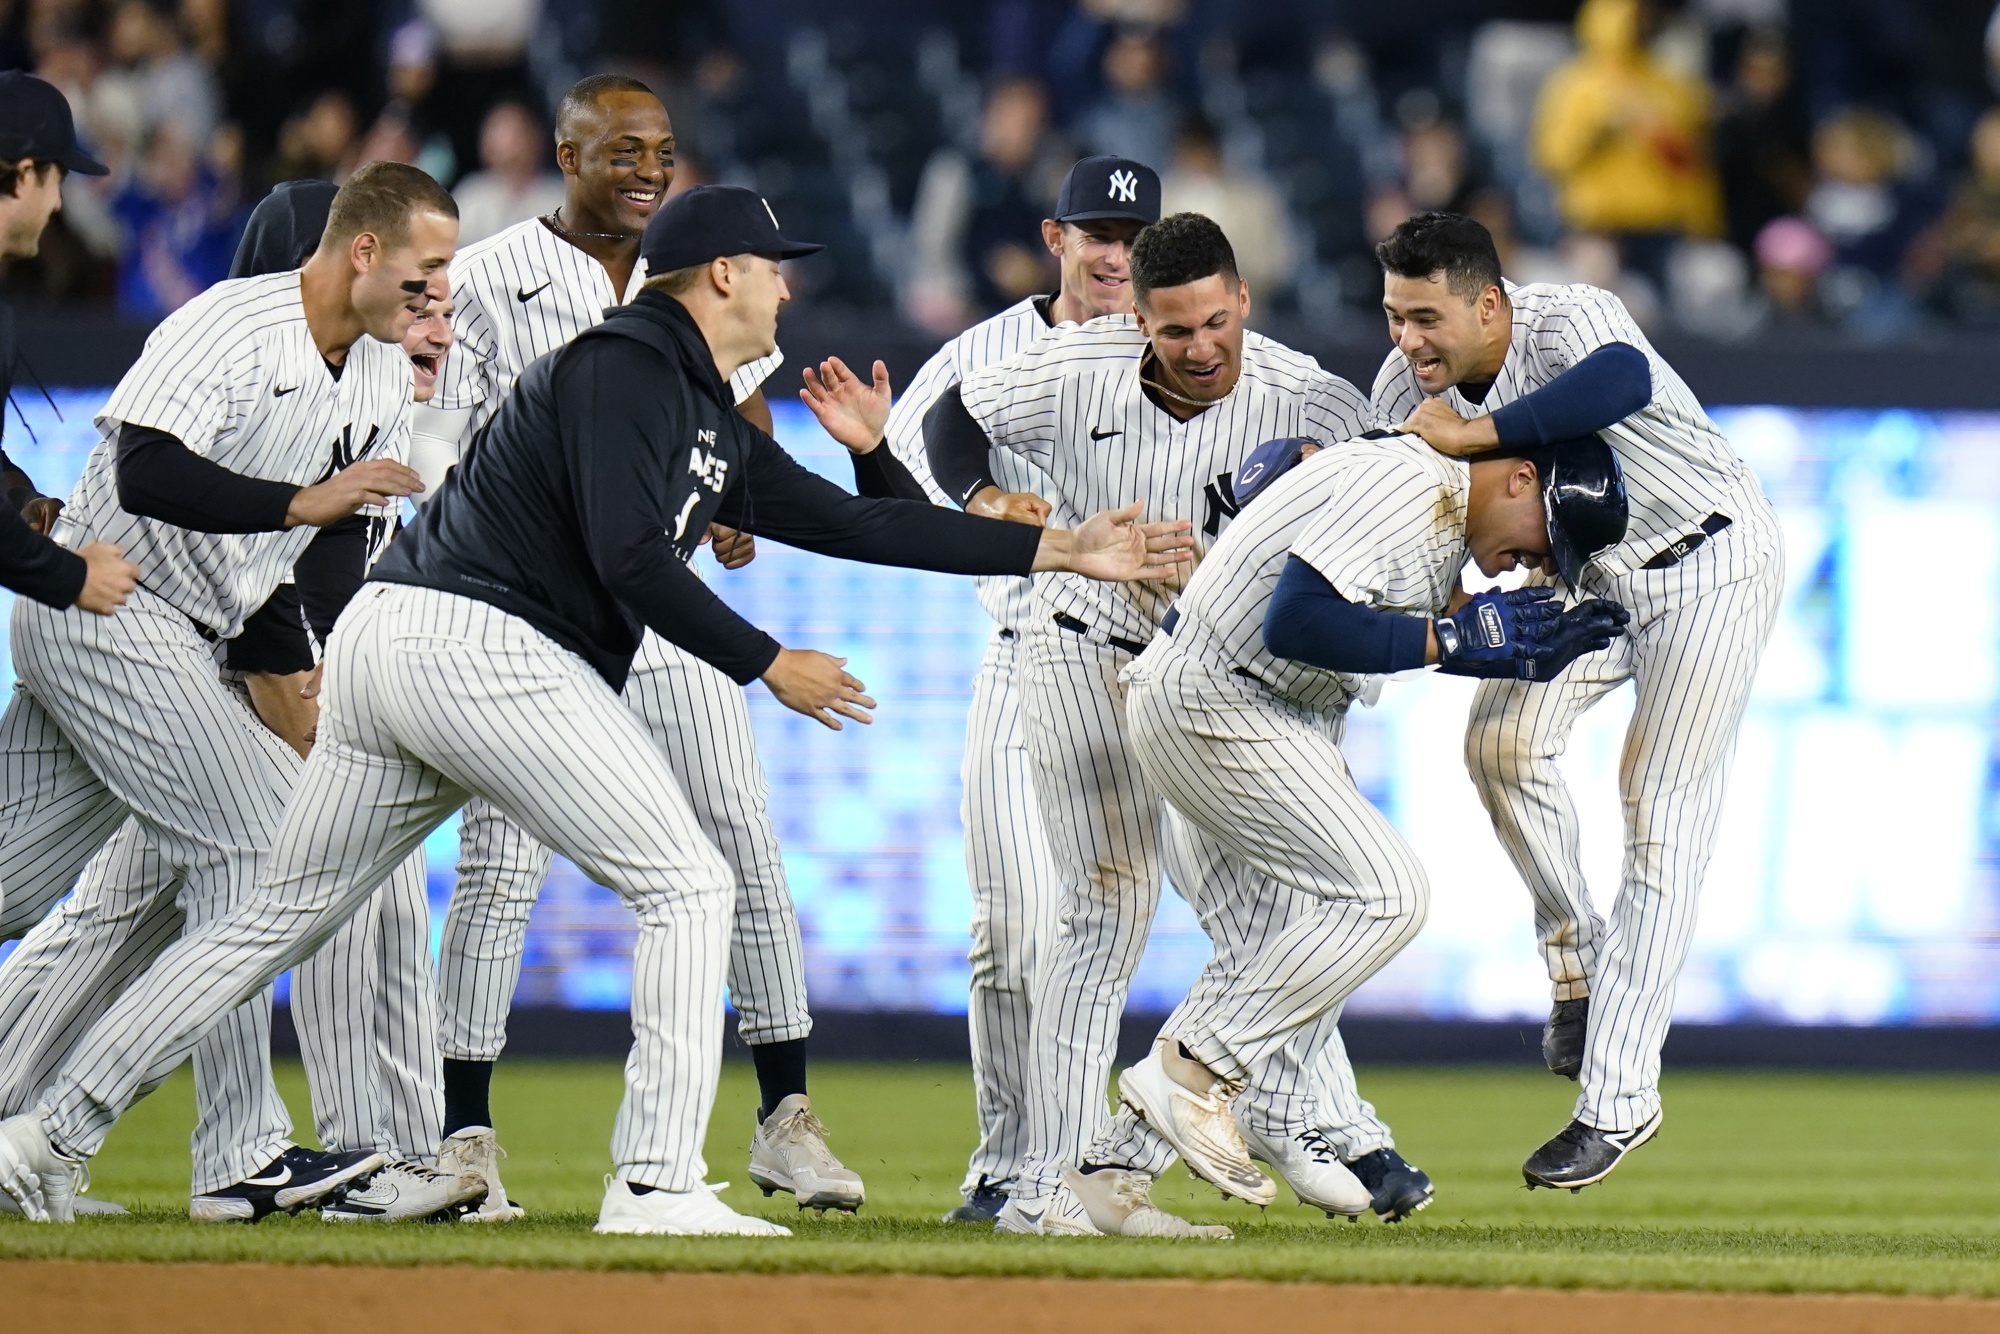 Emotional Trevino Delivers for Yanks on Late Dad's Birthday - Bloomberg